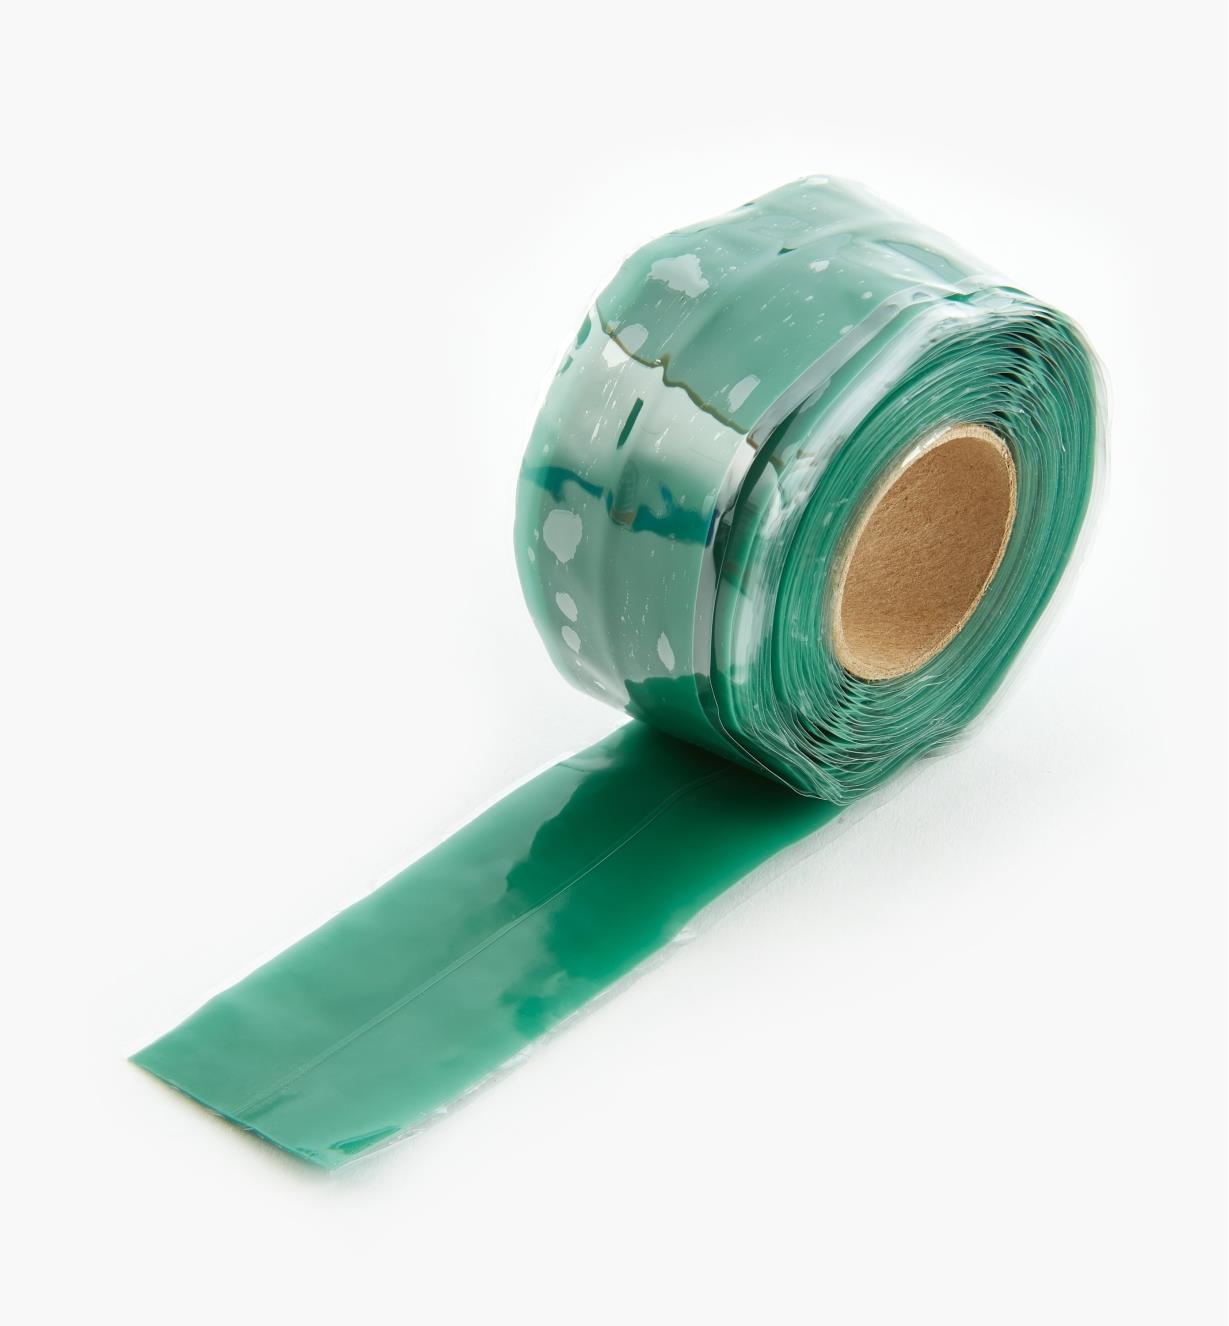 23K3012 - Green Silicone Tape, 1" x 10'